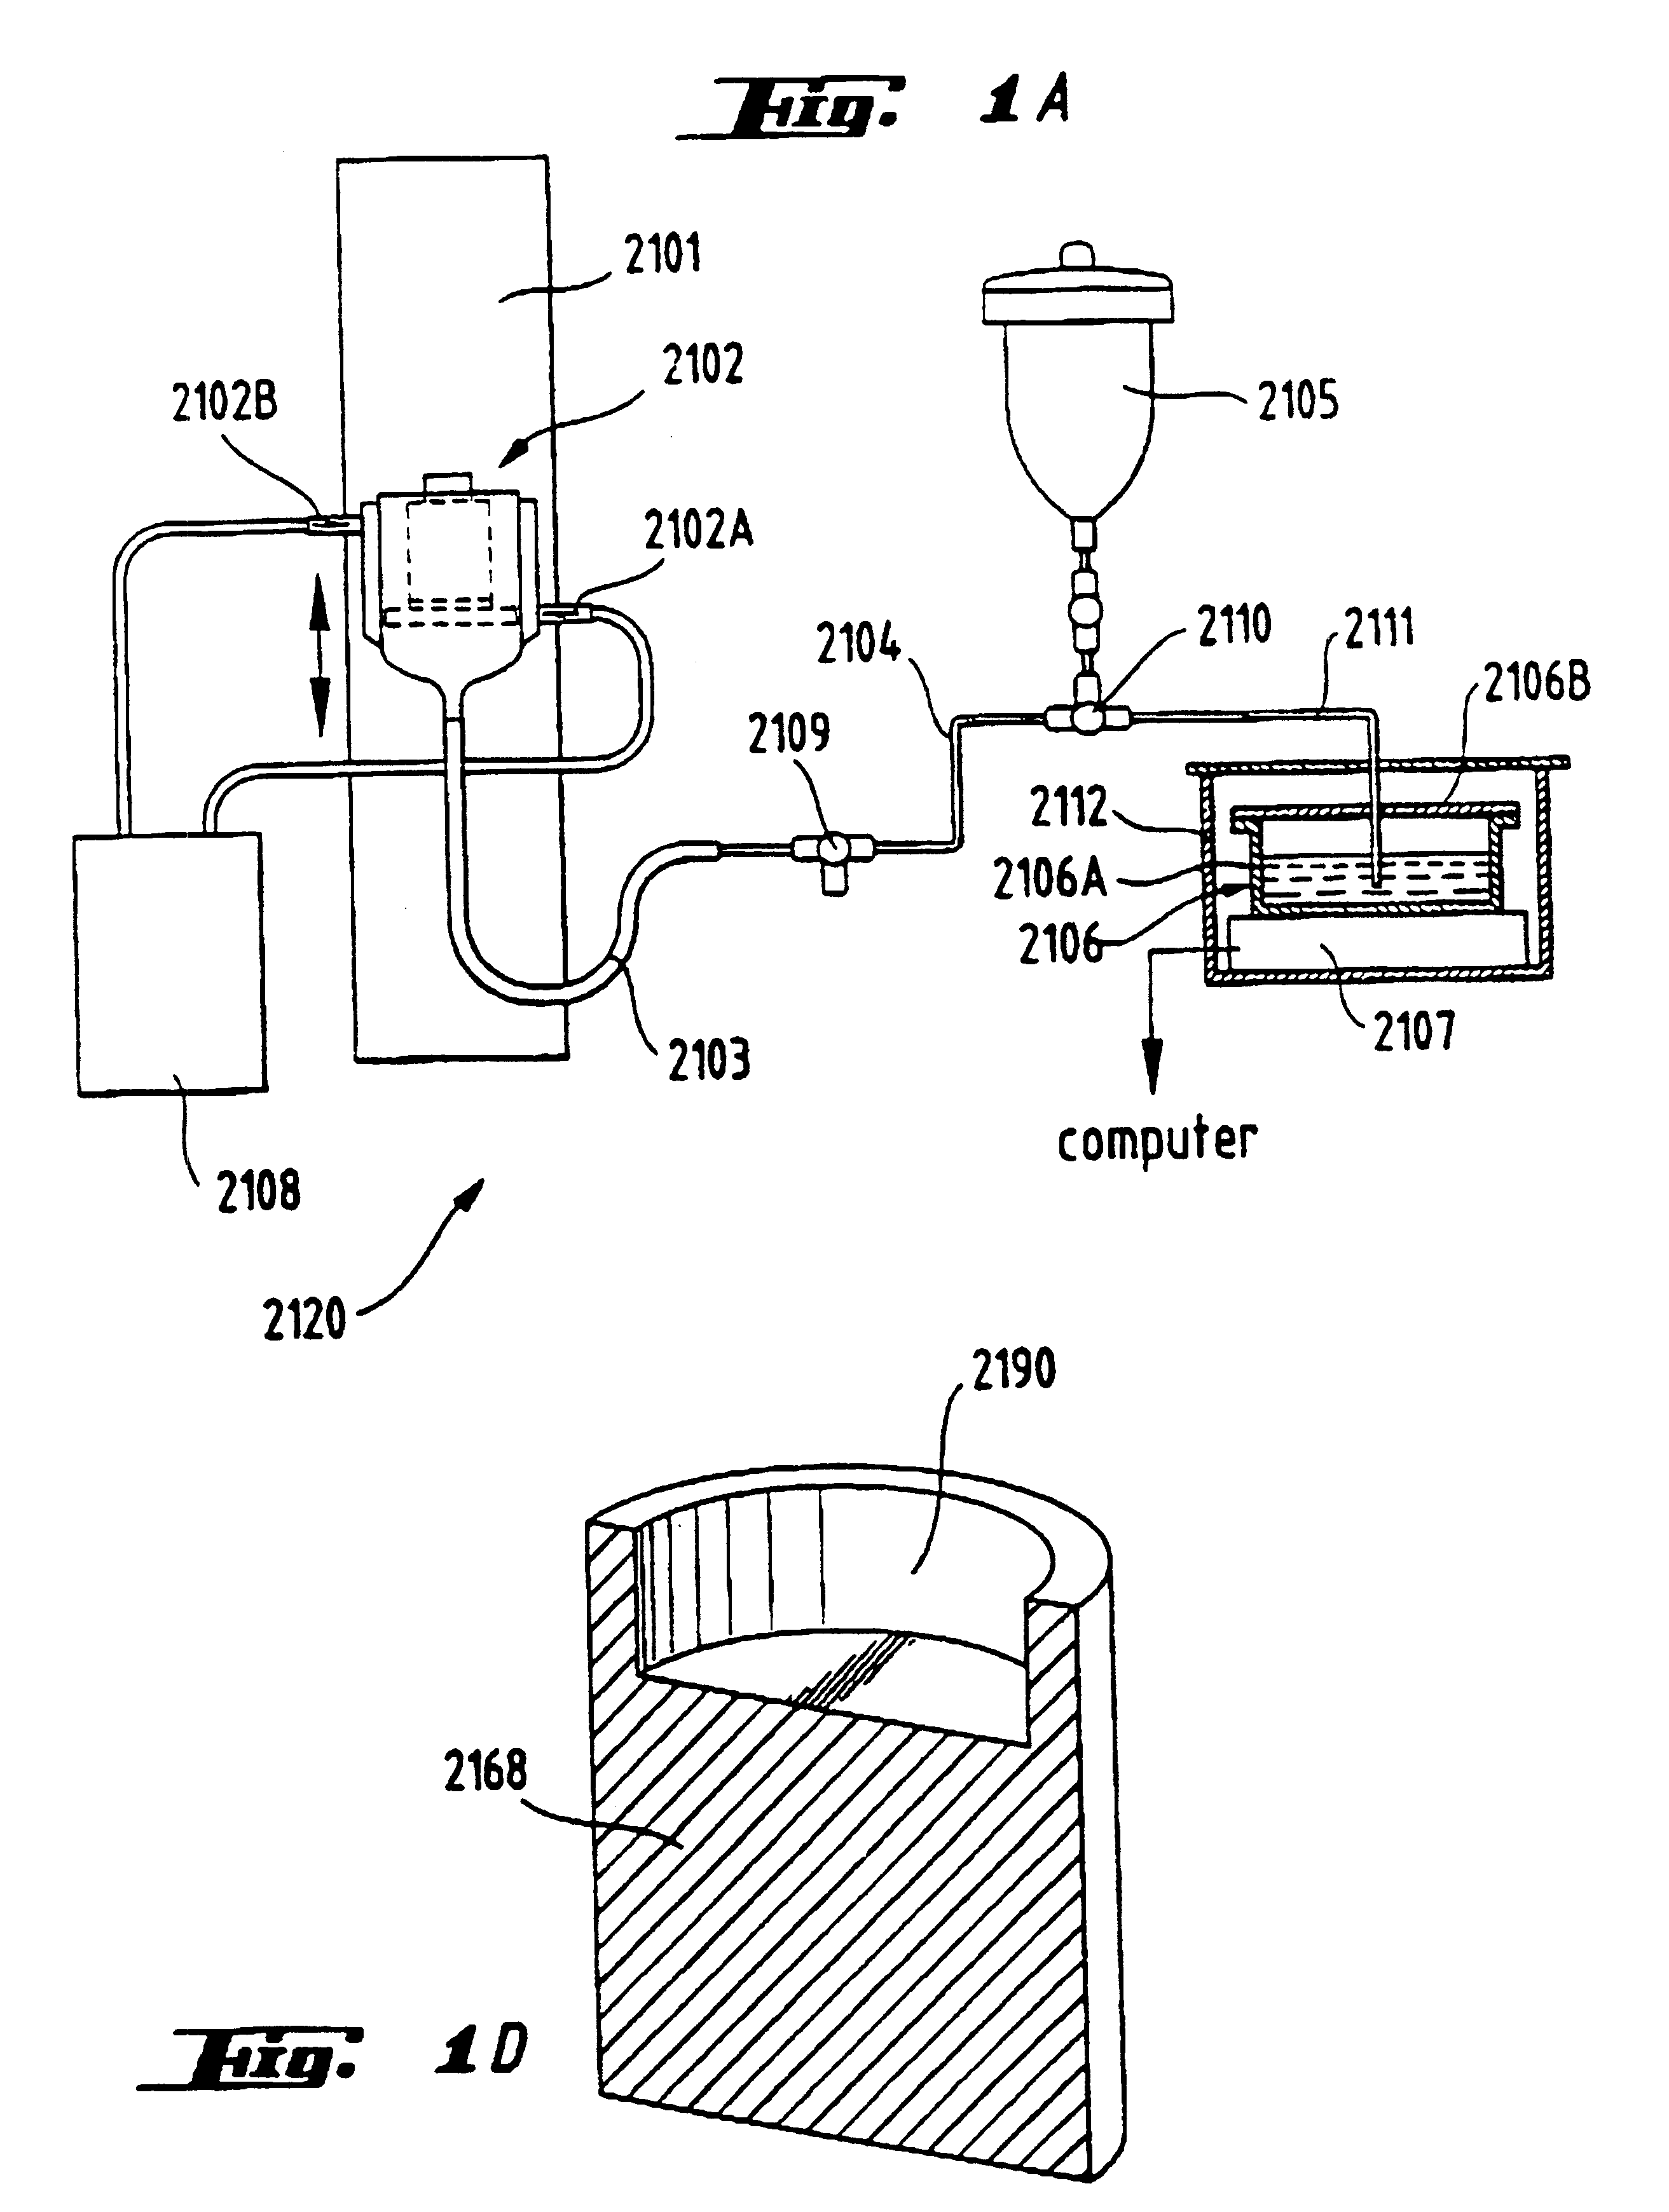 Device for managing body fluids comprising a fast acquiring liquid handling member that expands upon liquid acquisition and contracts upon liquid release